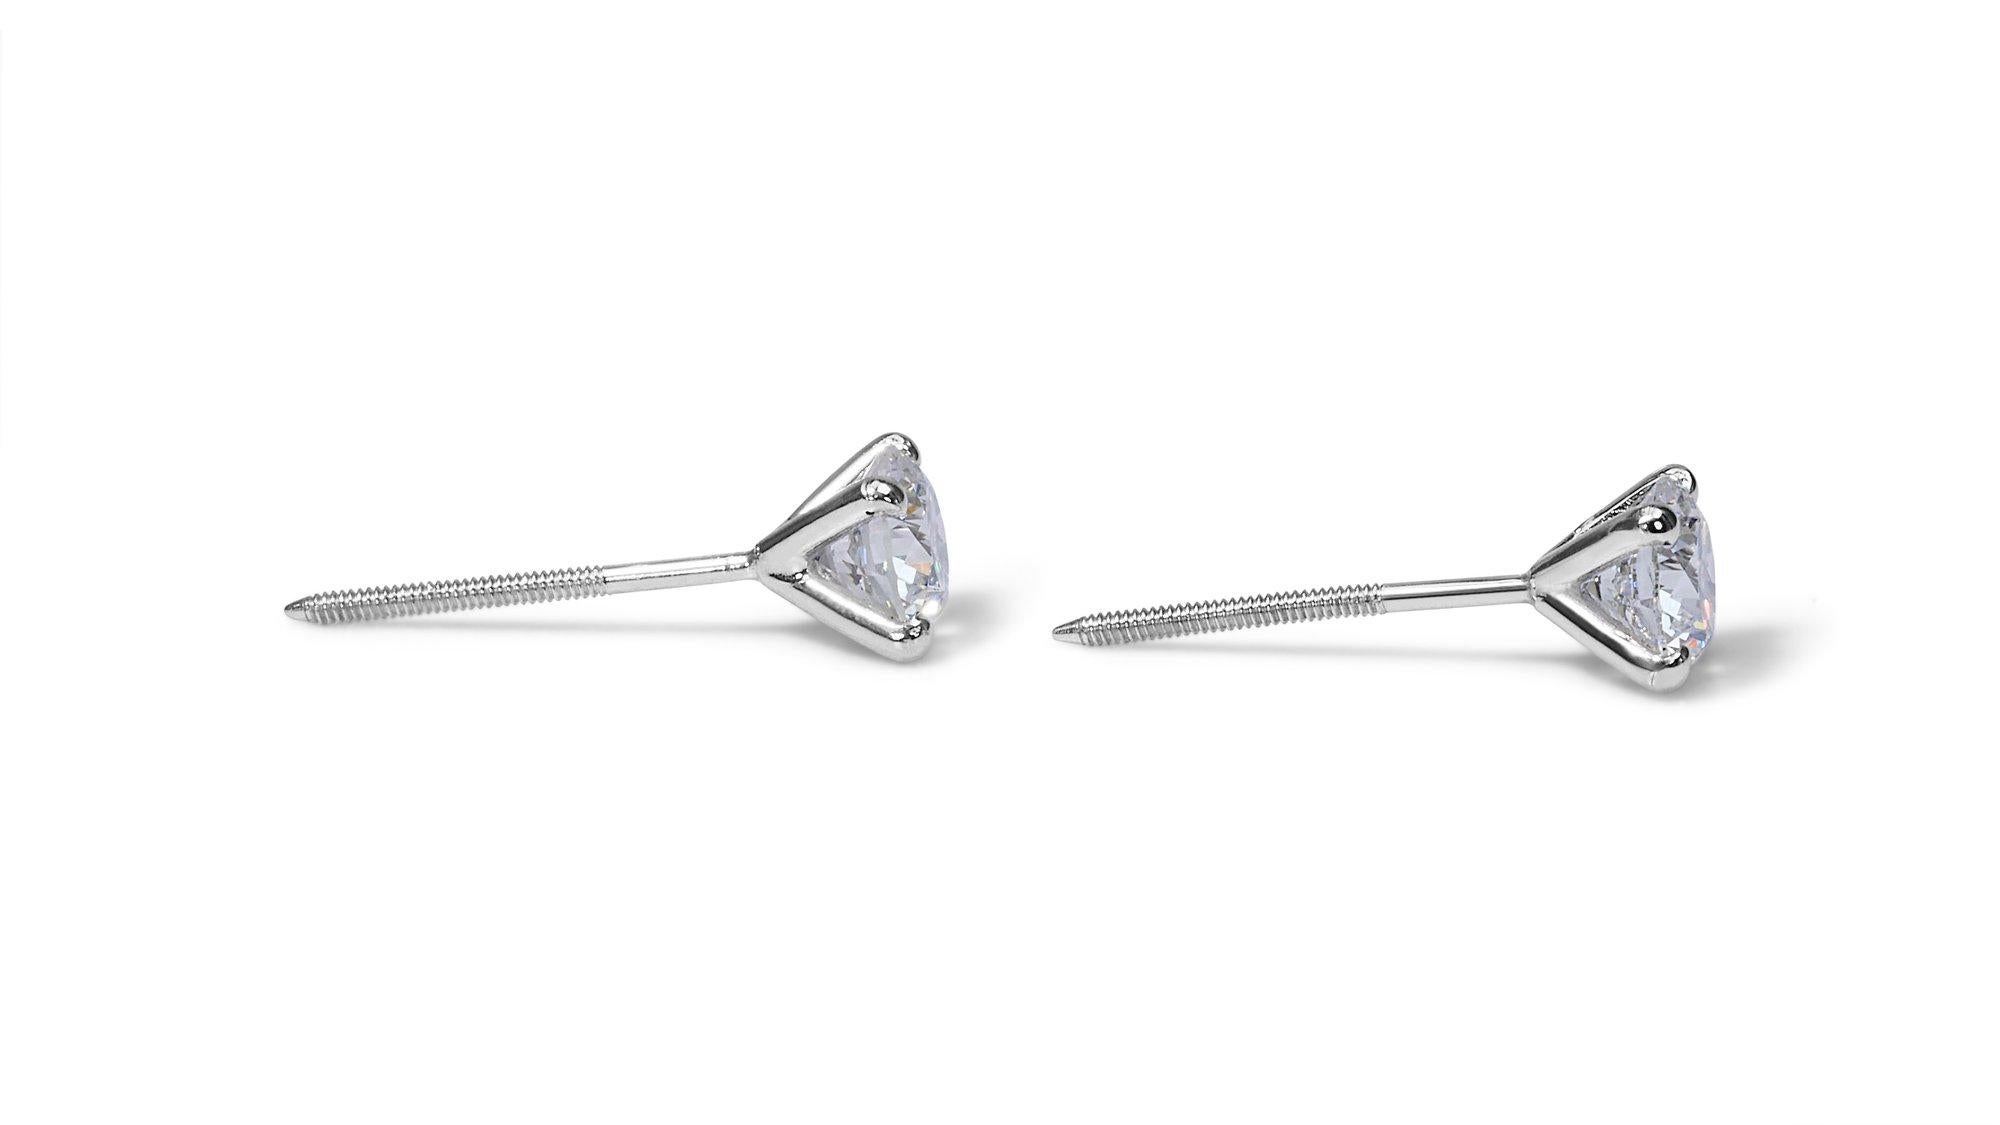 Exquisite 1.42ct Round Diamond Stud Earrings in 18k White Gold - GIA Certified In New Condition For Sale In רמת גן, IL